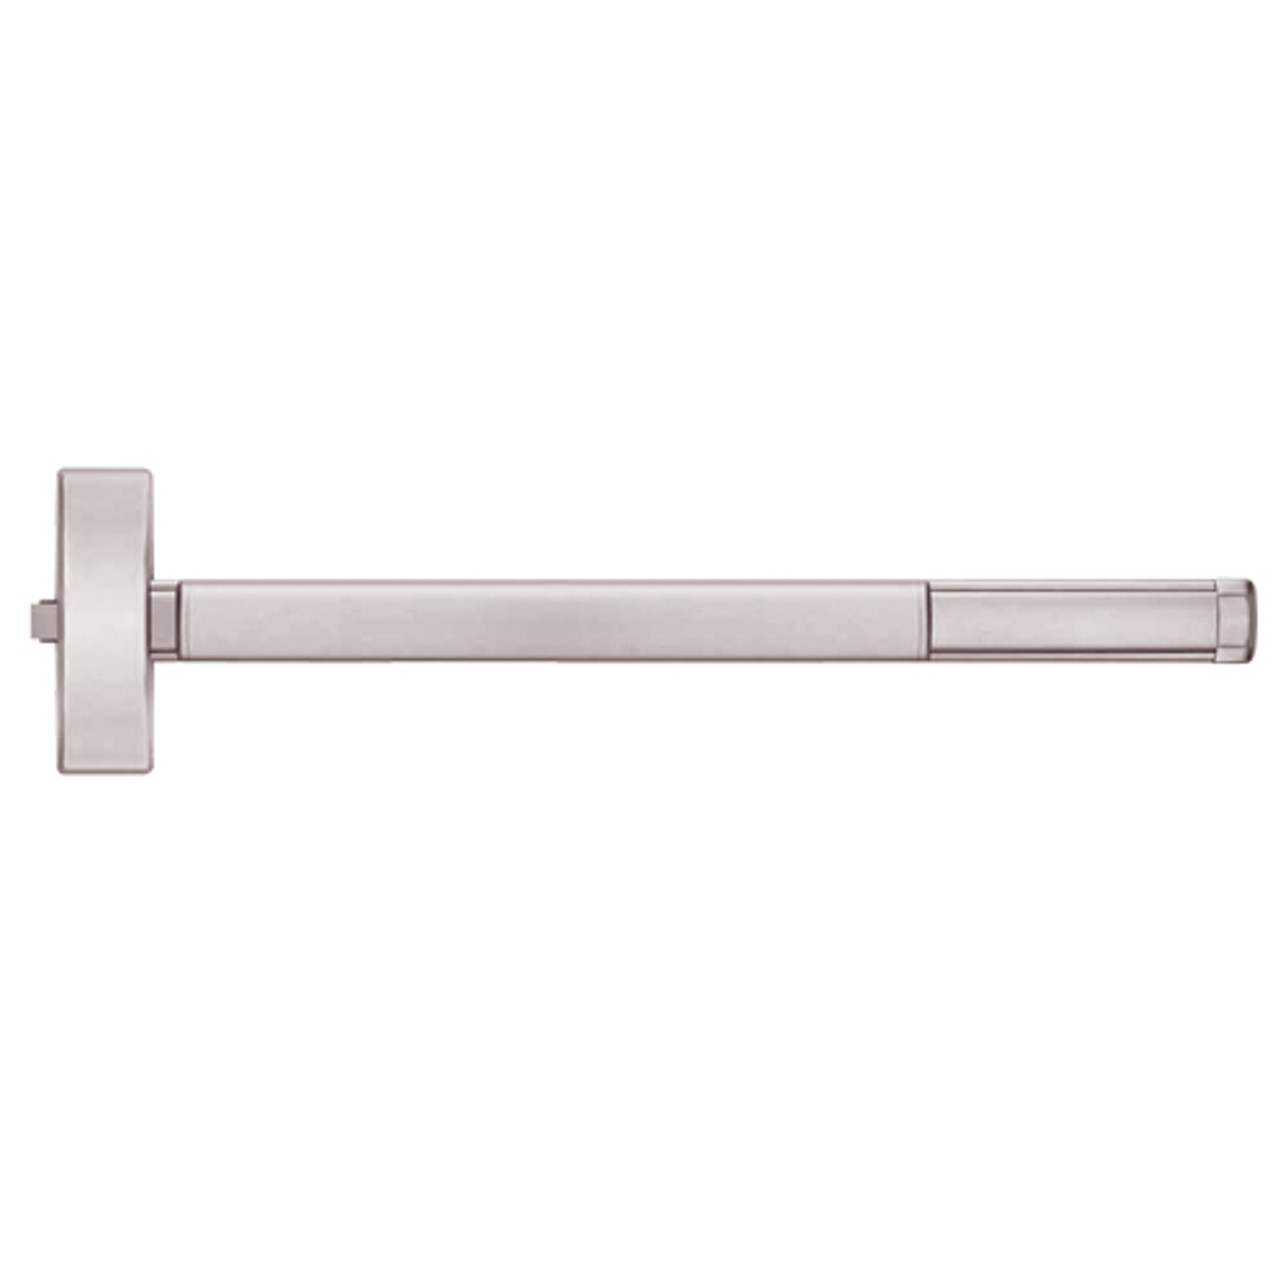 ELRFL2101-628-36 PHI 2100 Series Fire Rated Apex Rim Exit Device with Electric Latch Retraction Prepped for Cover Plate in Satin Aluminum Finish